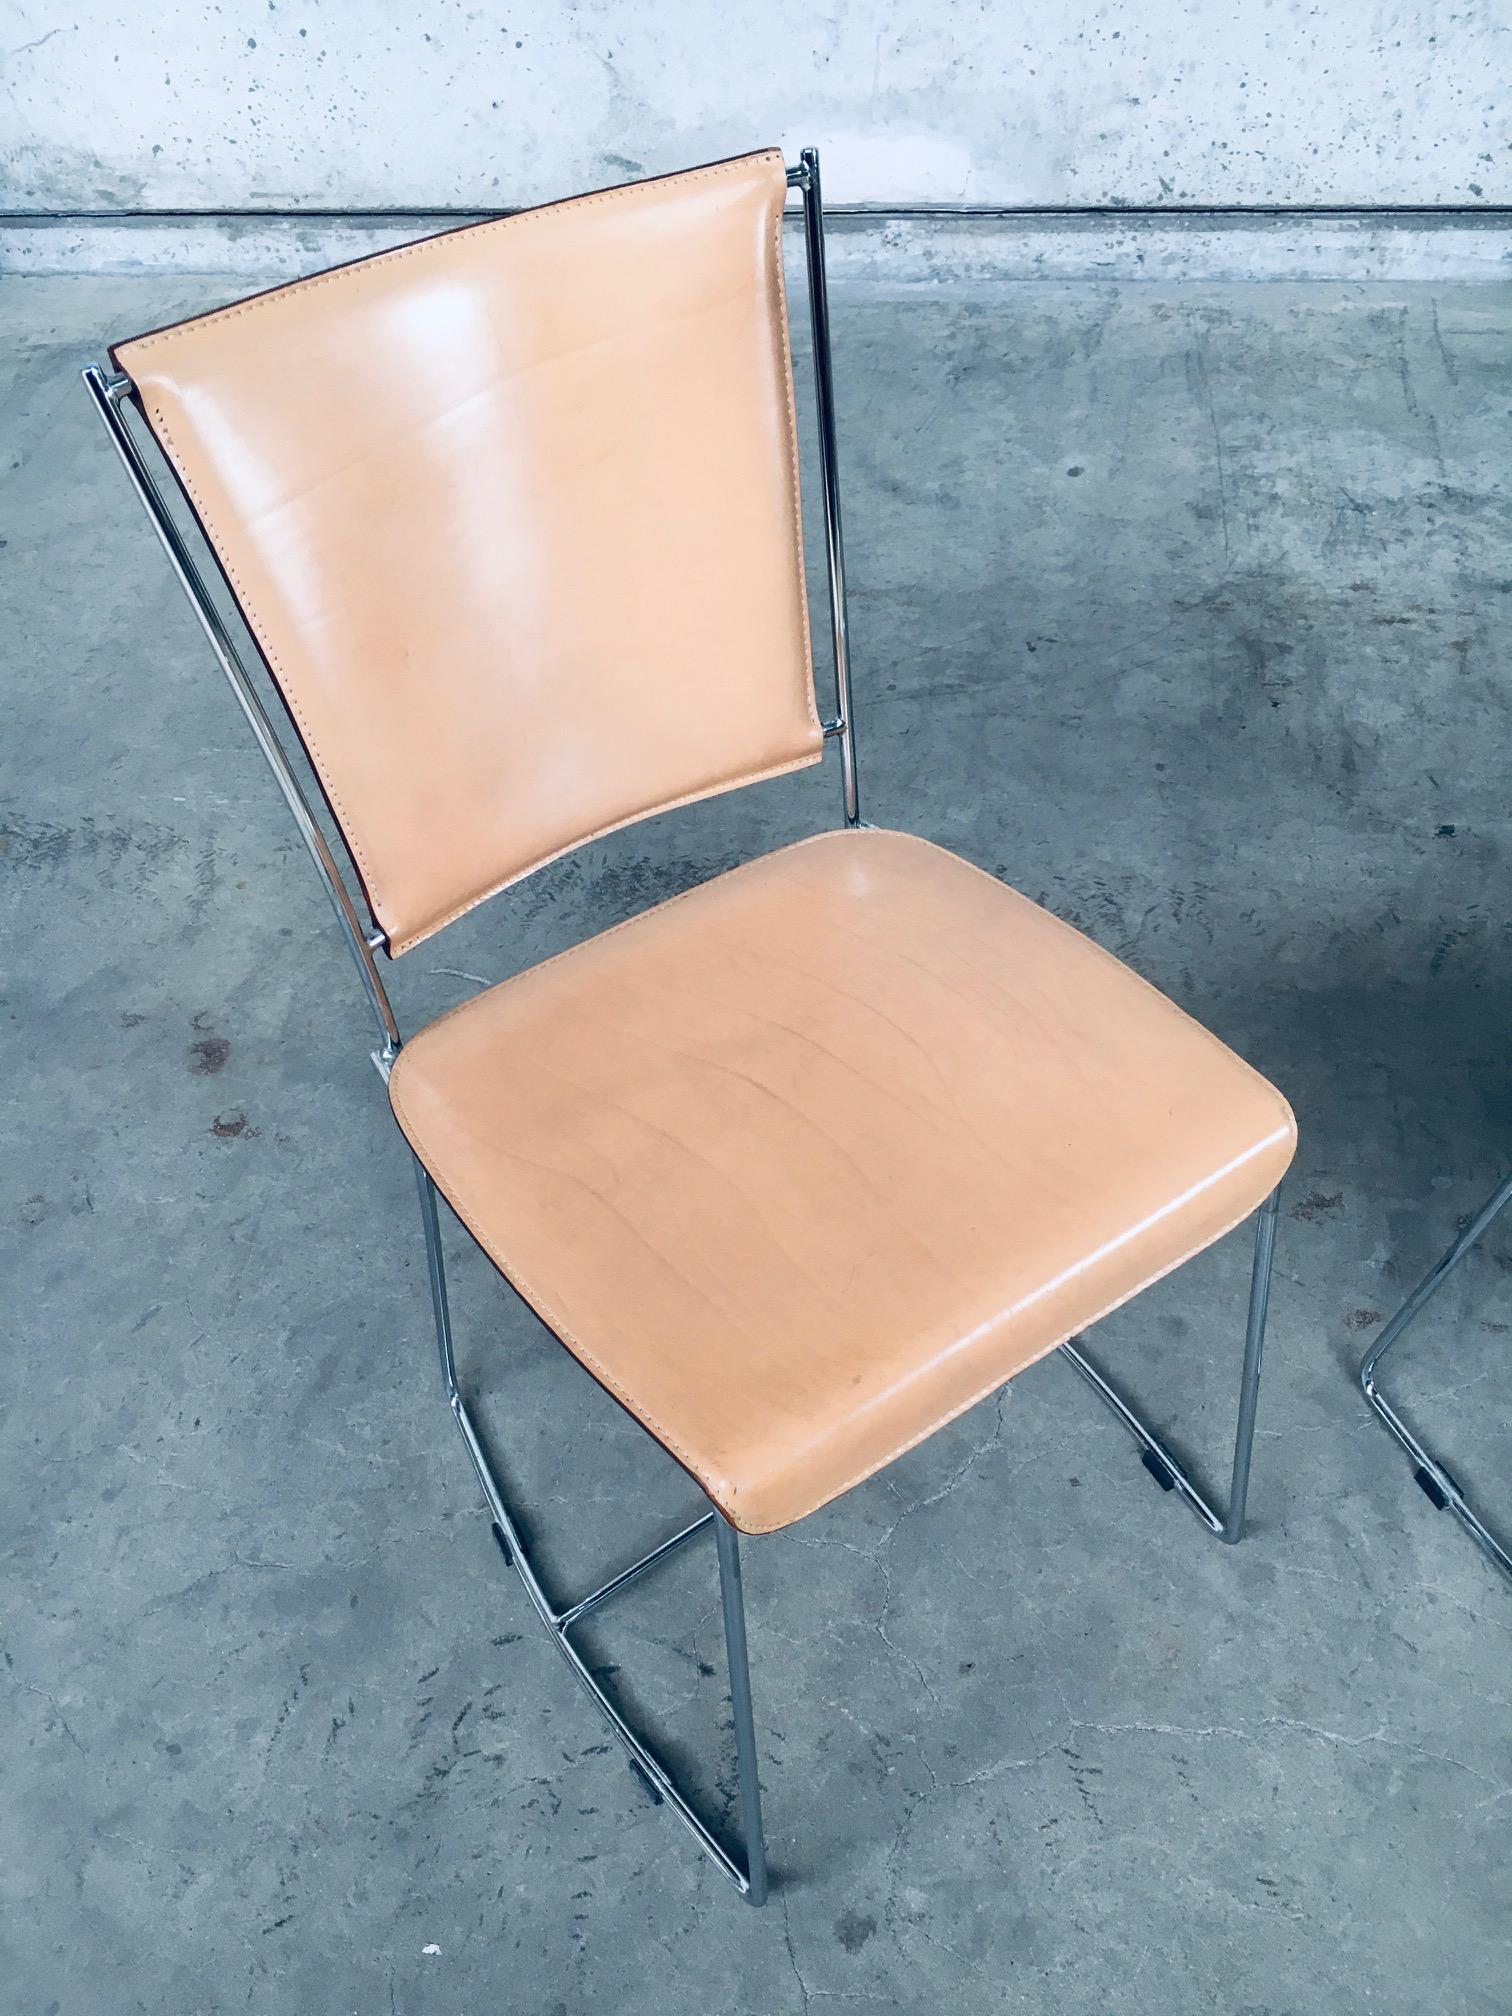 Postmodern Italian Design Leather Dining Chair set by Segis, Italy 1990's For Sale 6